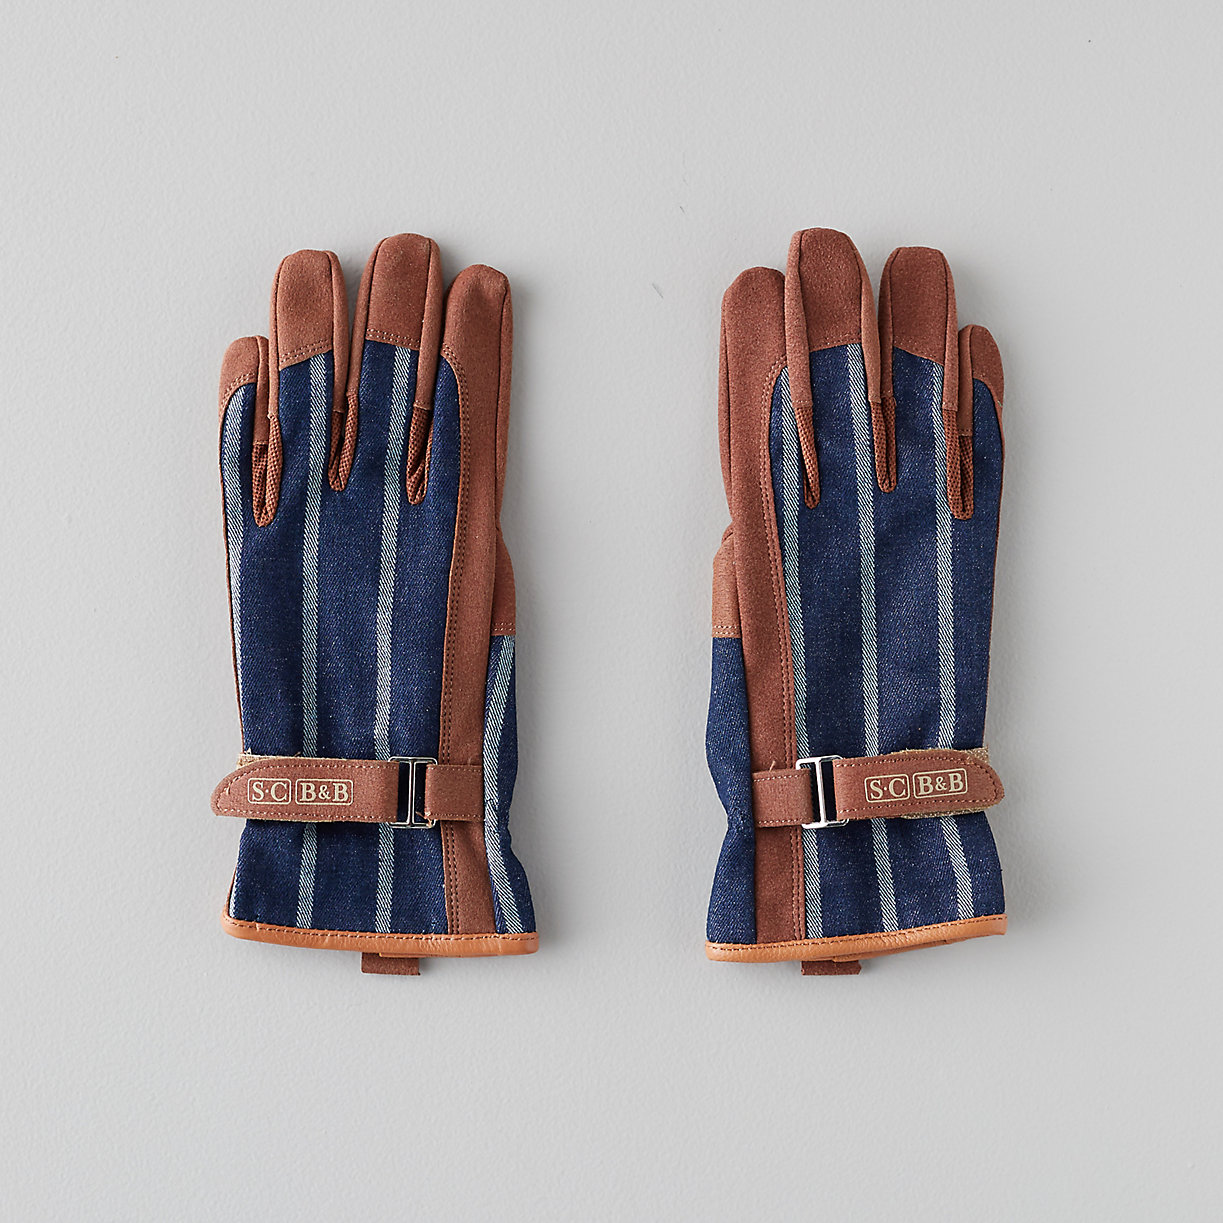 Two leather gloves with a blue and white strip design.